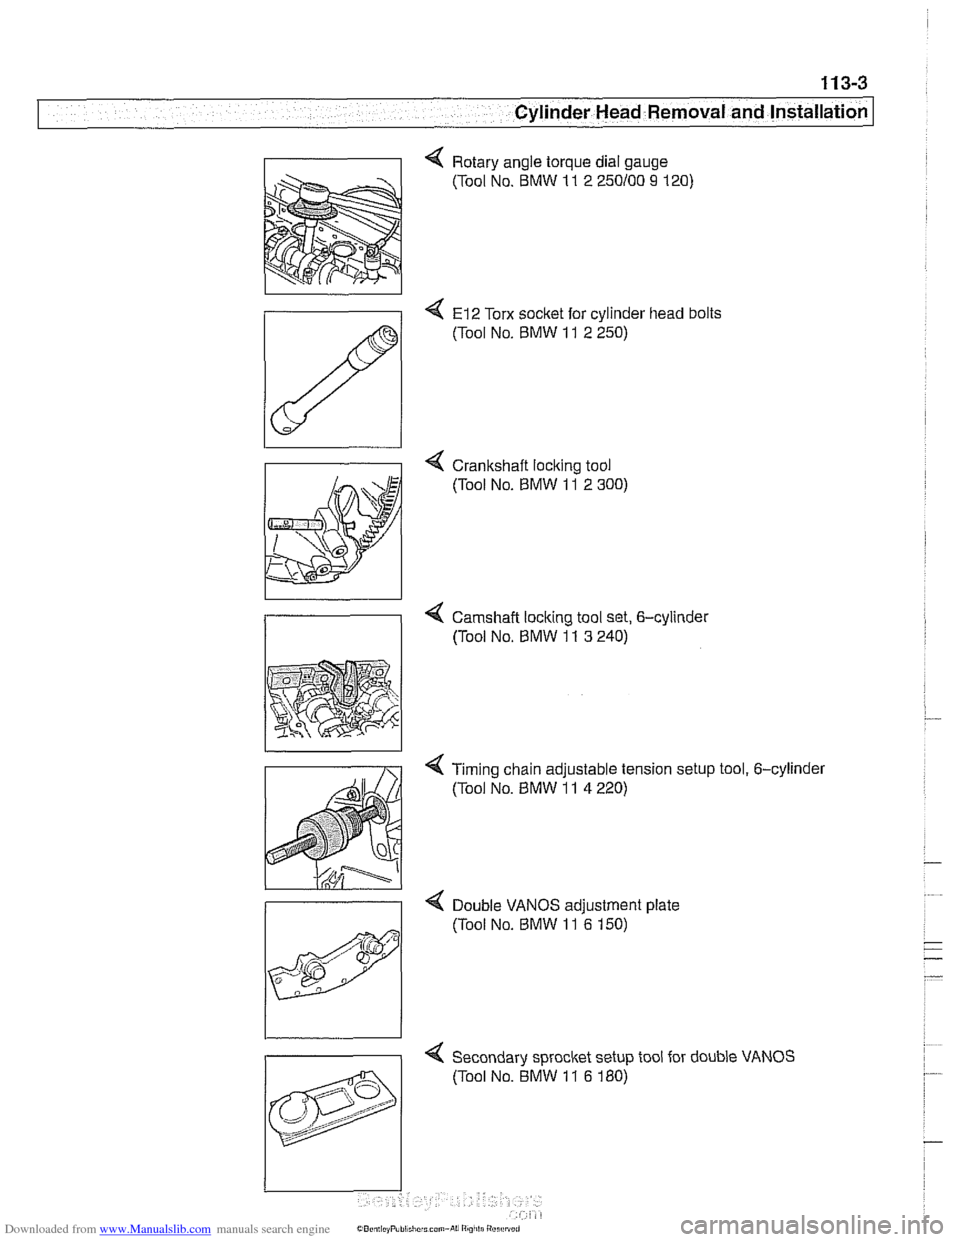 BMW 530i 2001 E39 Workshop Manual Downloaded from www.Manualslib.com manuals search engine 
11 3-3 
Cylinder Head Removal and Installation 
4 Rotary  angle torque  dial gauge 
(Tool  No. BMW 
11 2 250100 9 120) 
4 El2 Torx  socket  fo